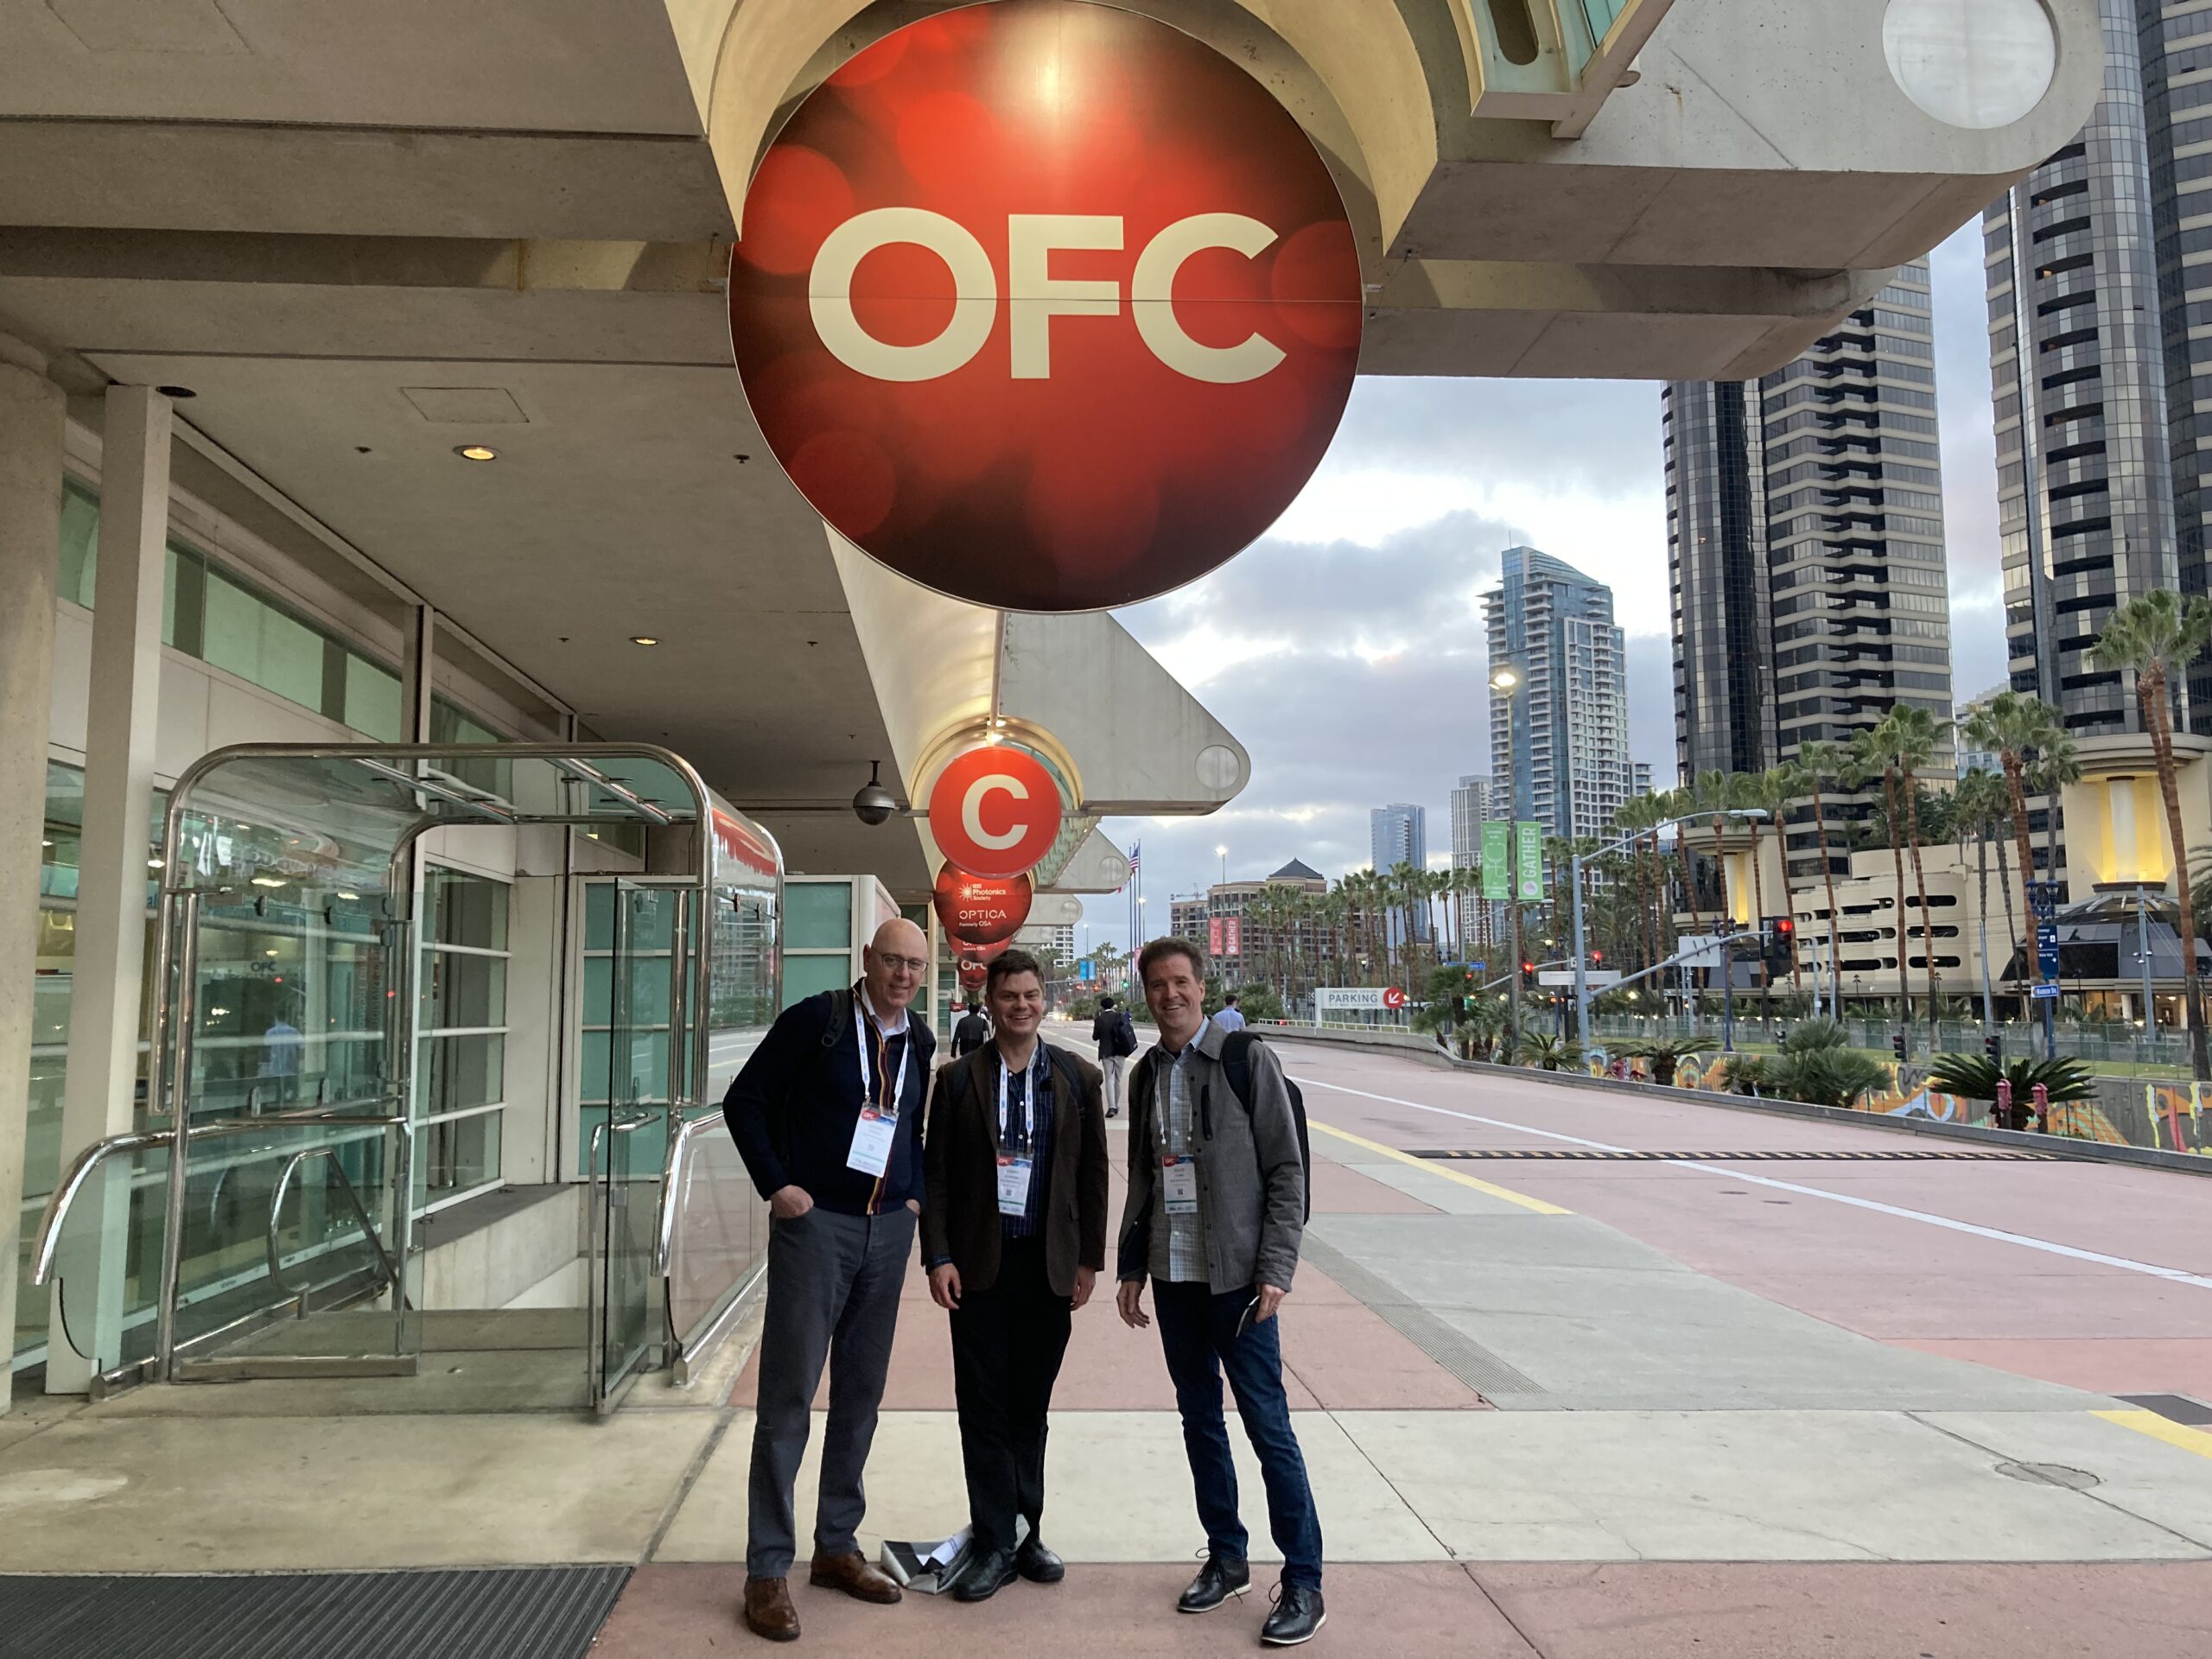 Gerard, Lewis, and David at OFC 2022. They're standing under the OFC conference sign outside of the conference center in San Diego